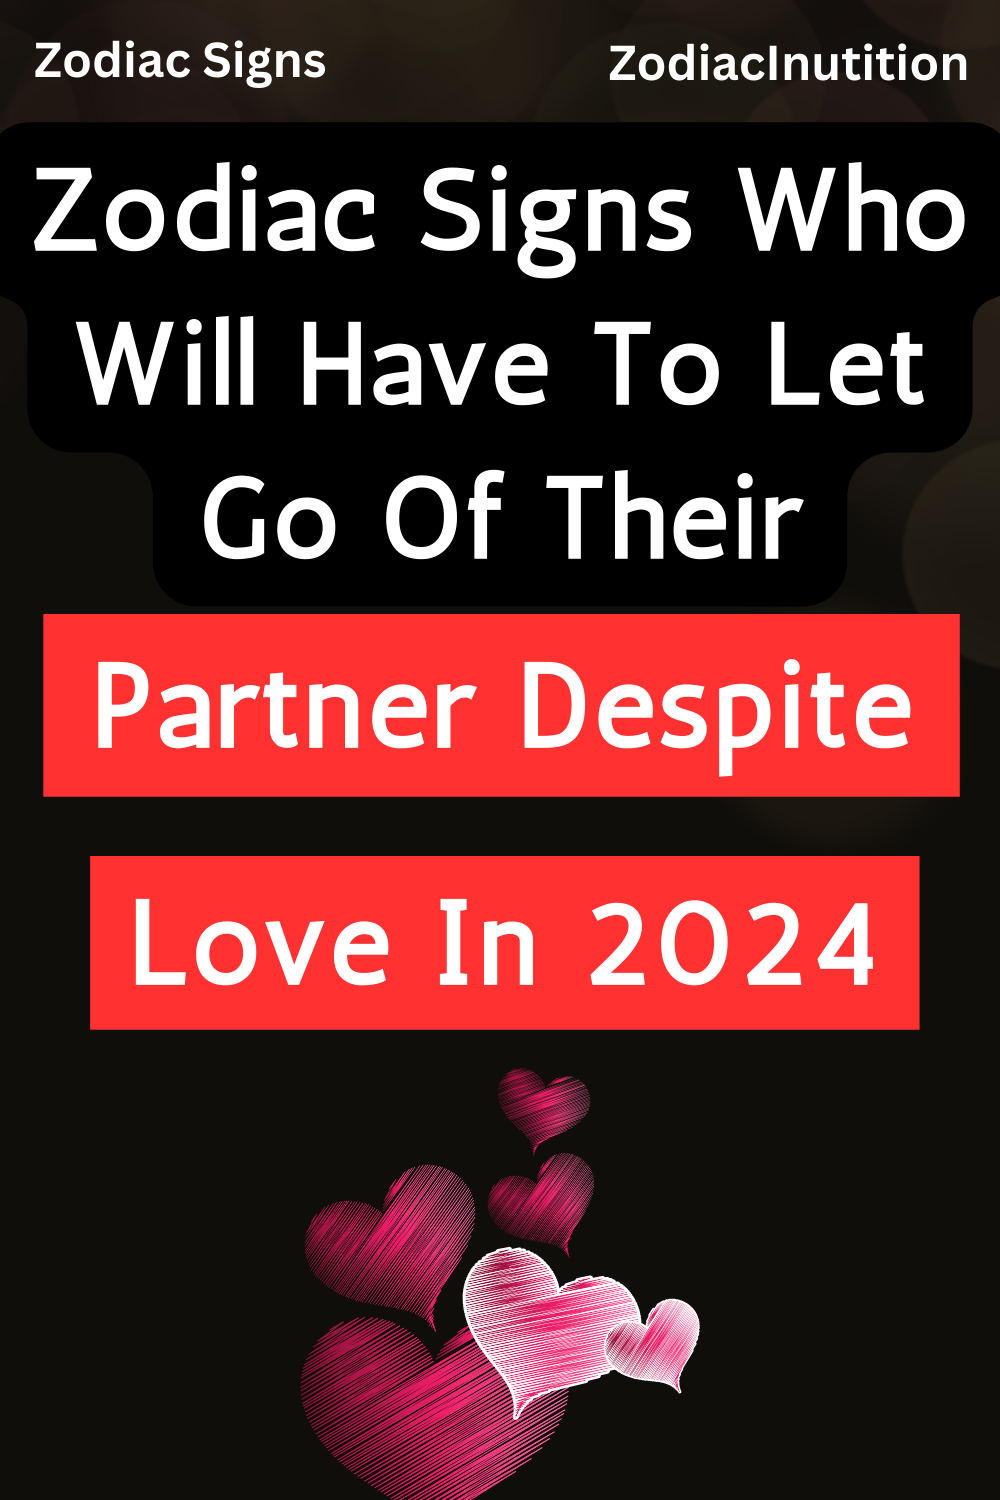 Zodiac Signs Who Will Have To Let Go Of Their Partner Despite Love In 2024